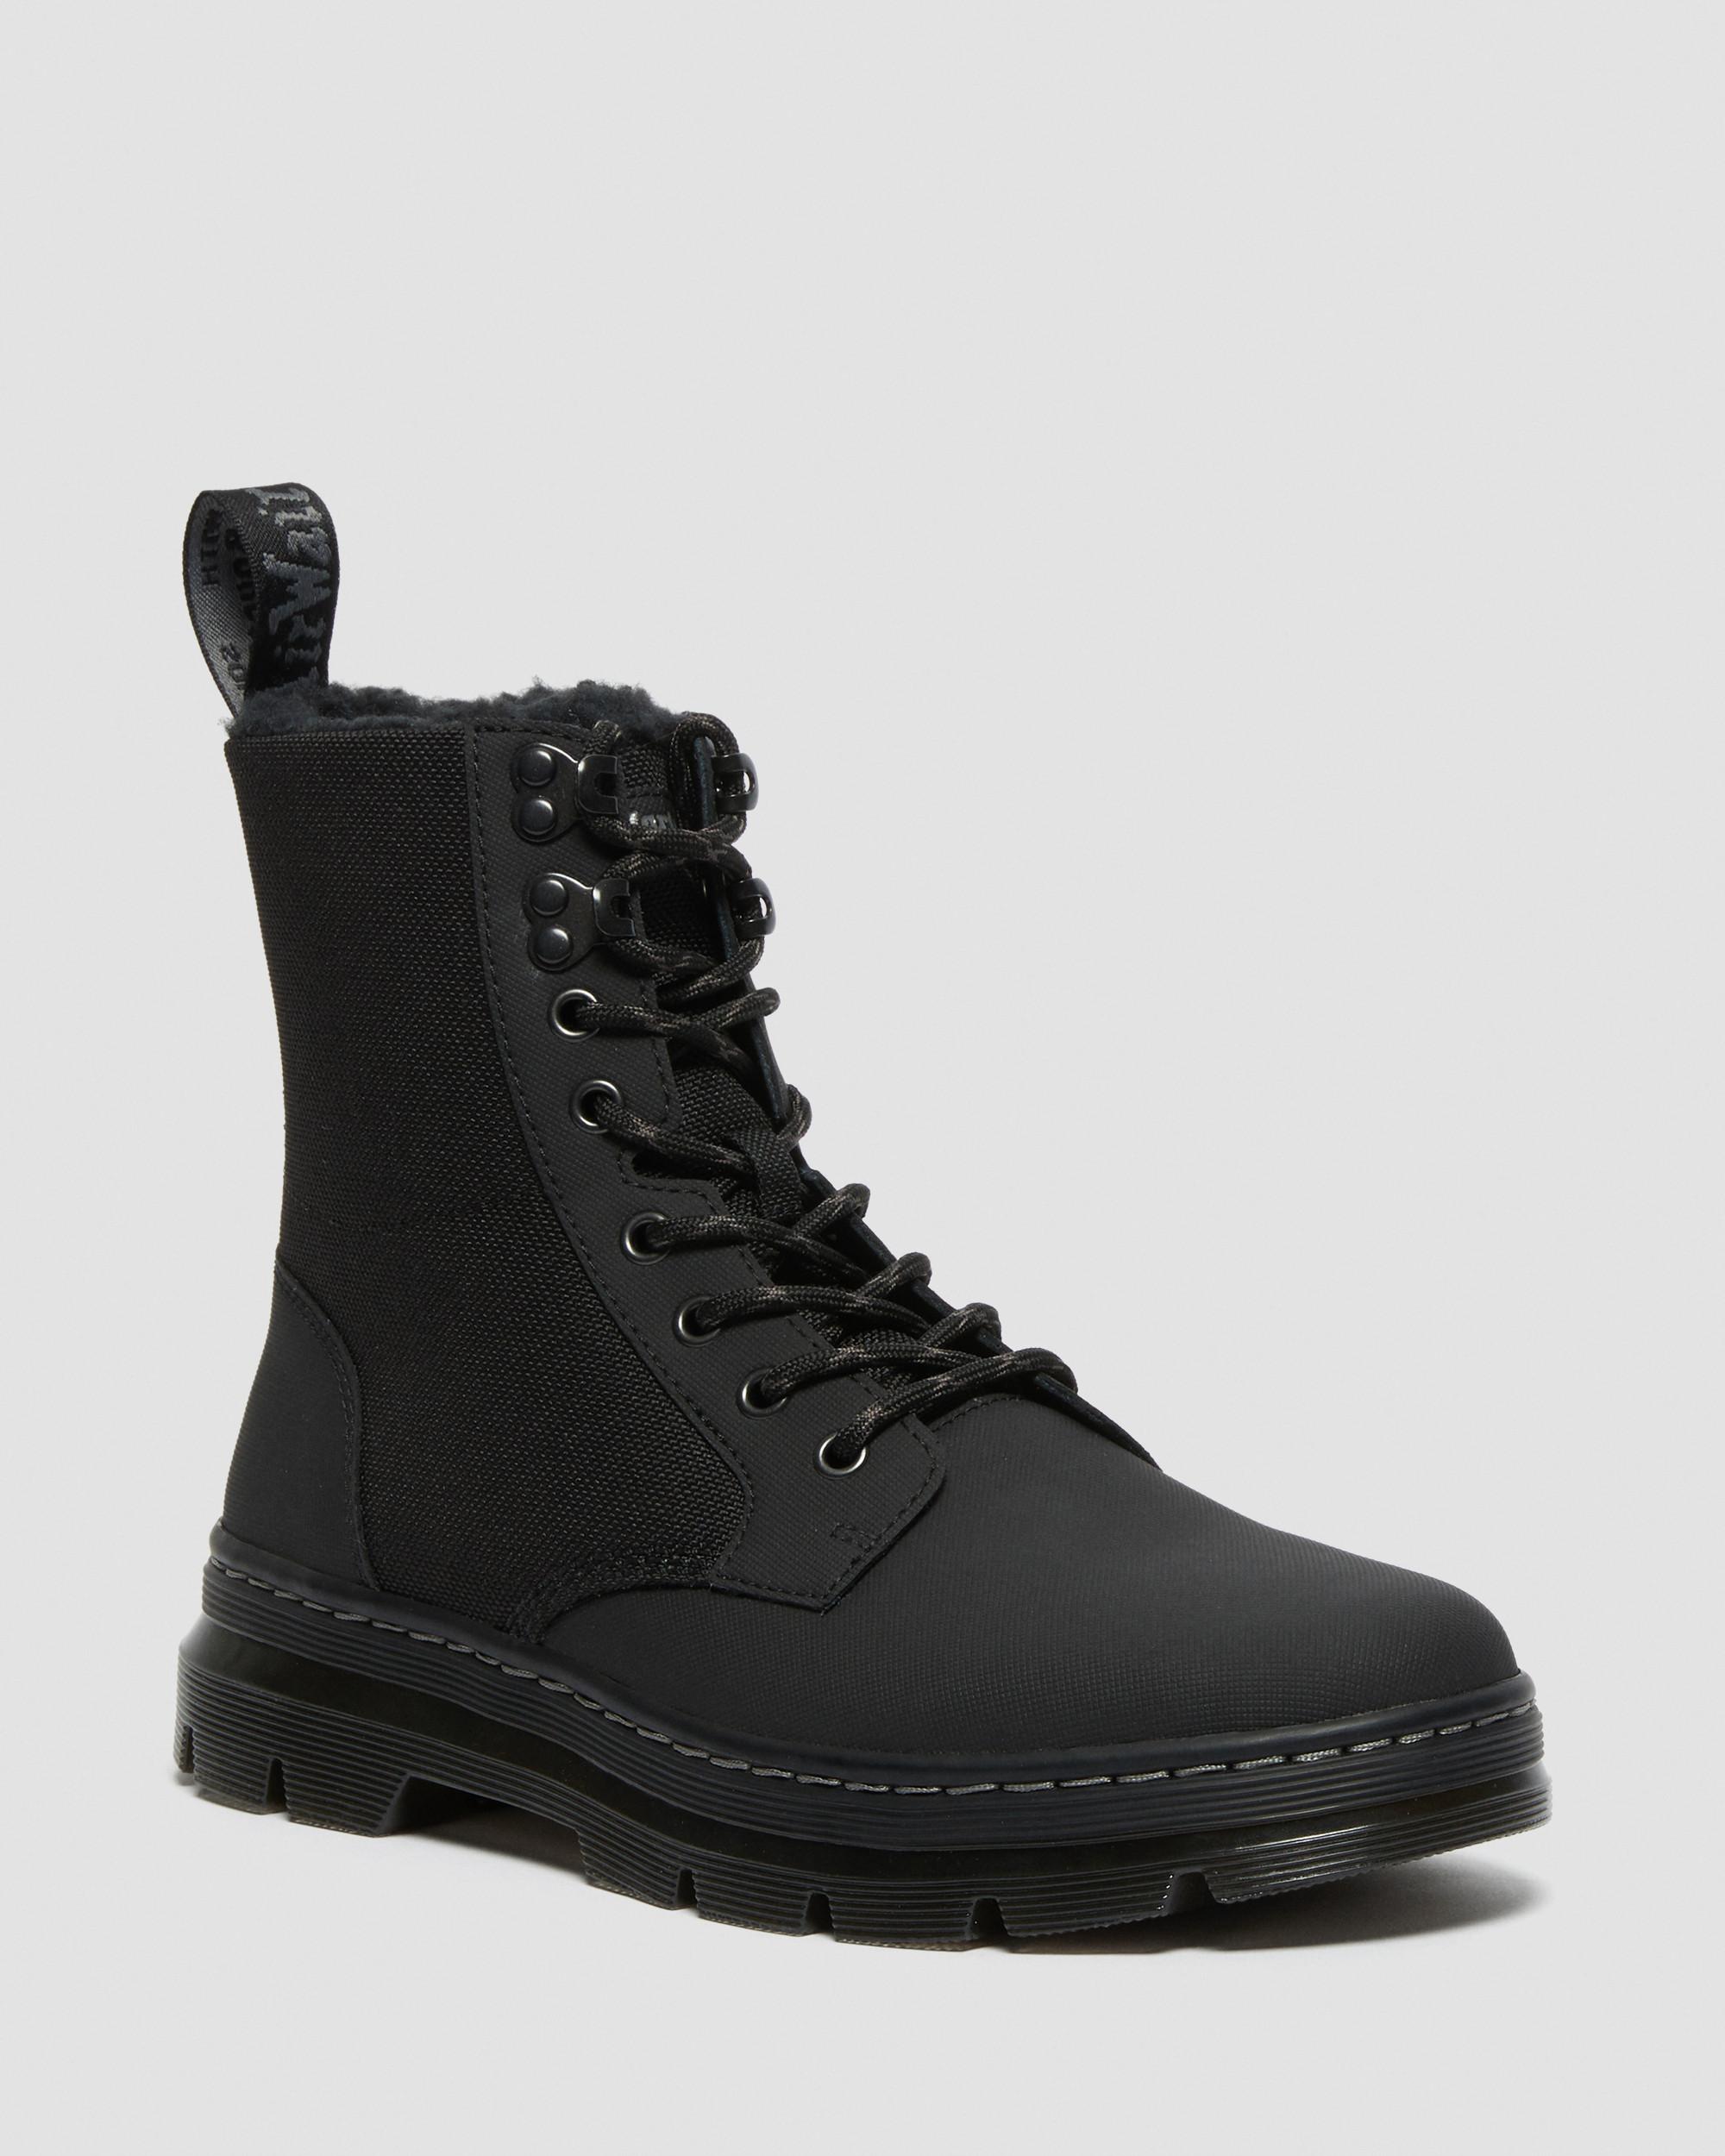 COMBS FLEECE LINED CASUAL BOOTS | Dr. Martens Official